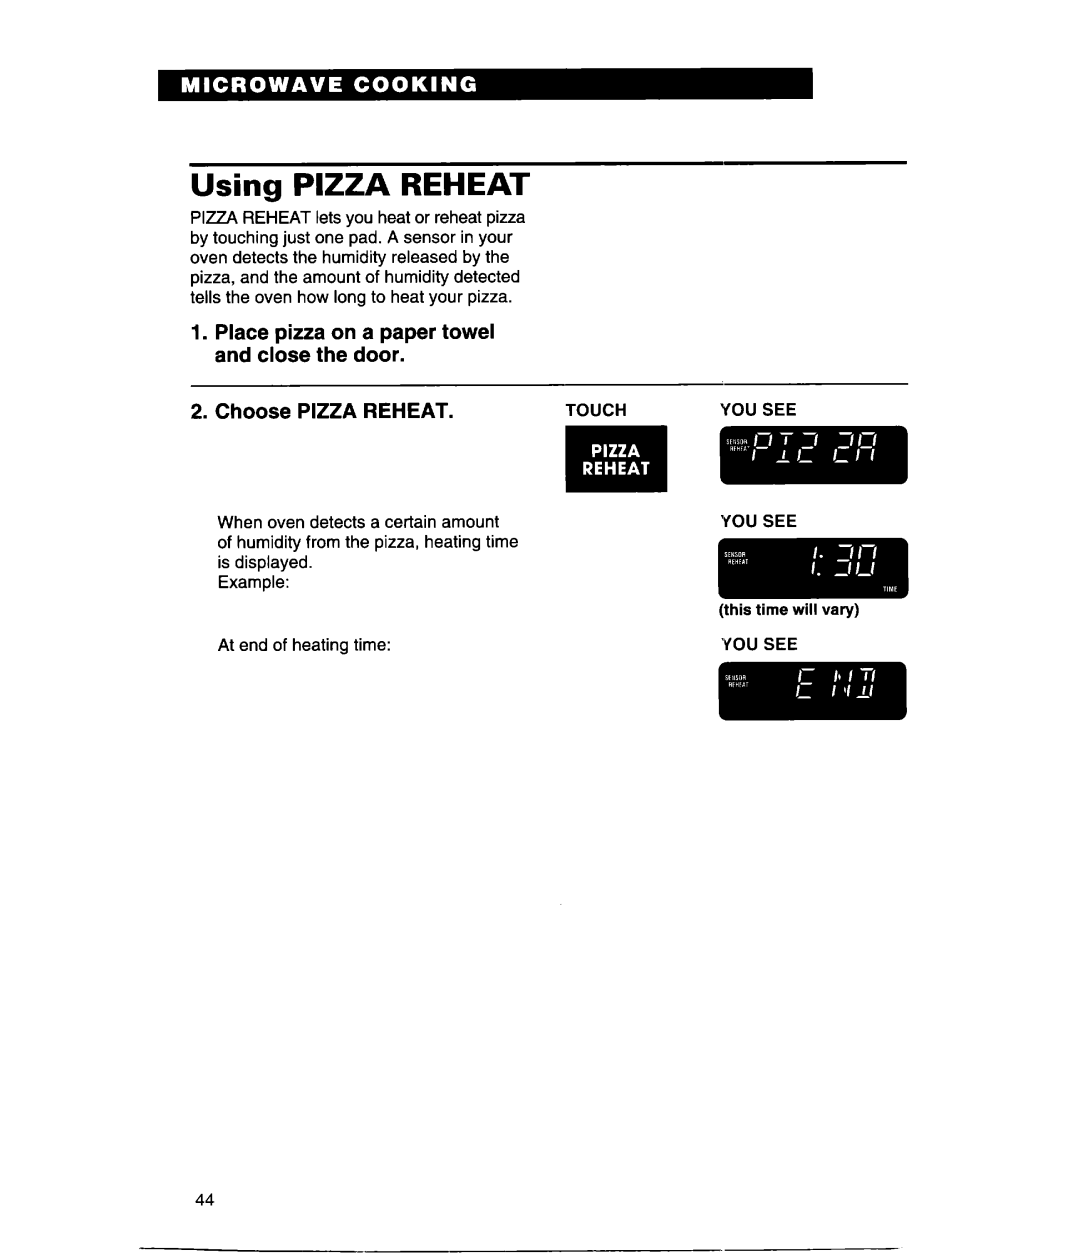 Whirlpool MH9115XE, GH9115XE Using PIZZA REHEAT, Place pizza on a paper towel and close the door, Choose PIZZA REHEAT 